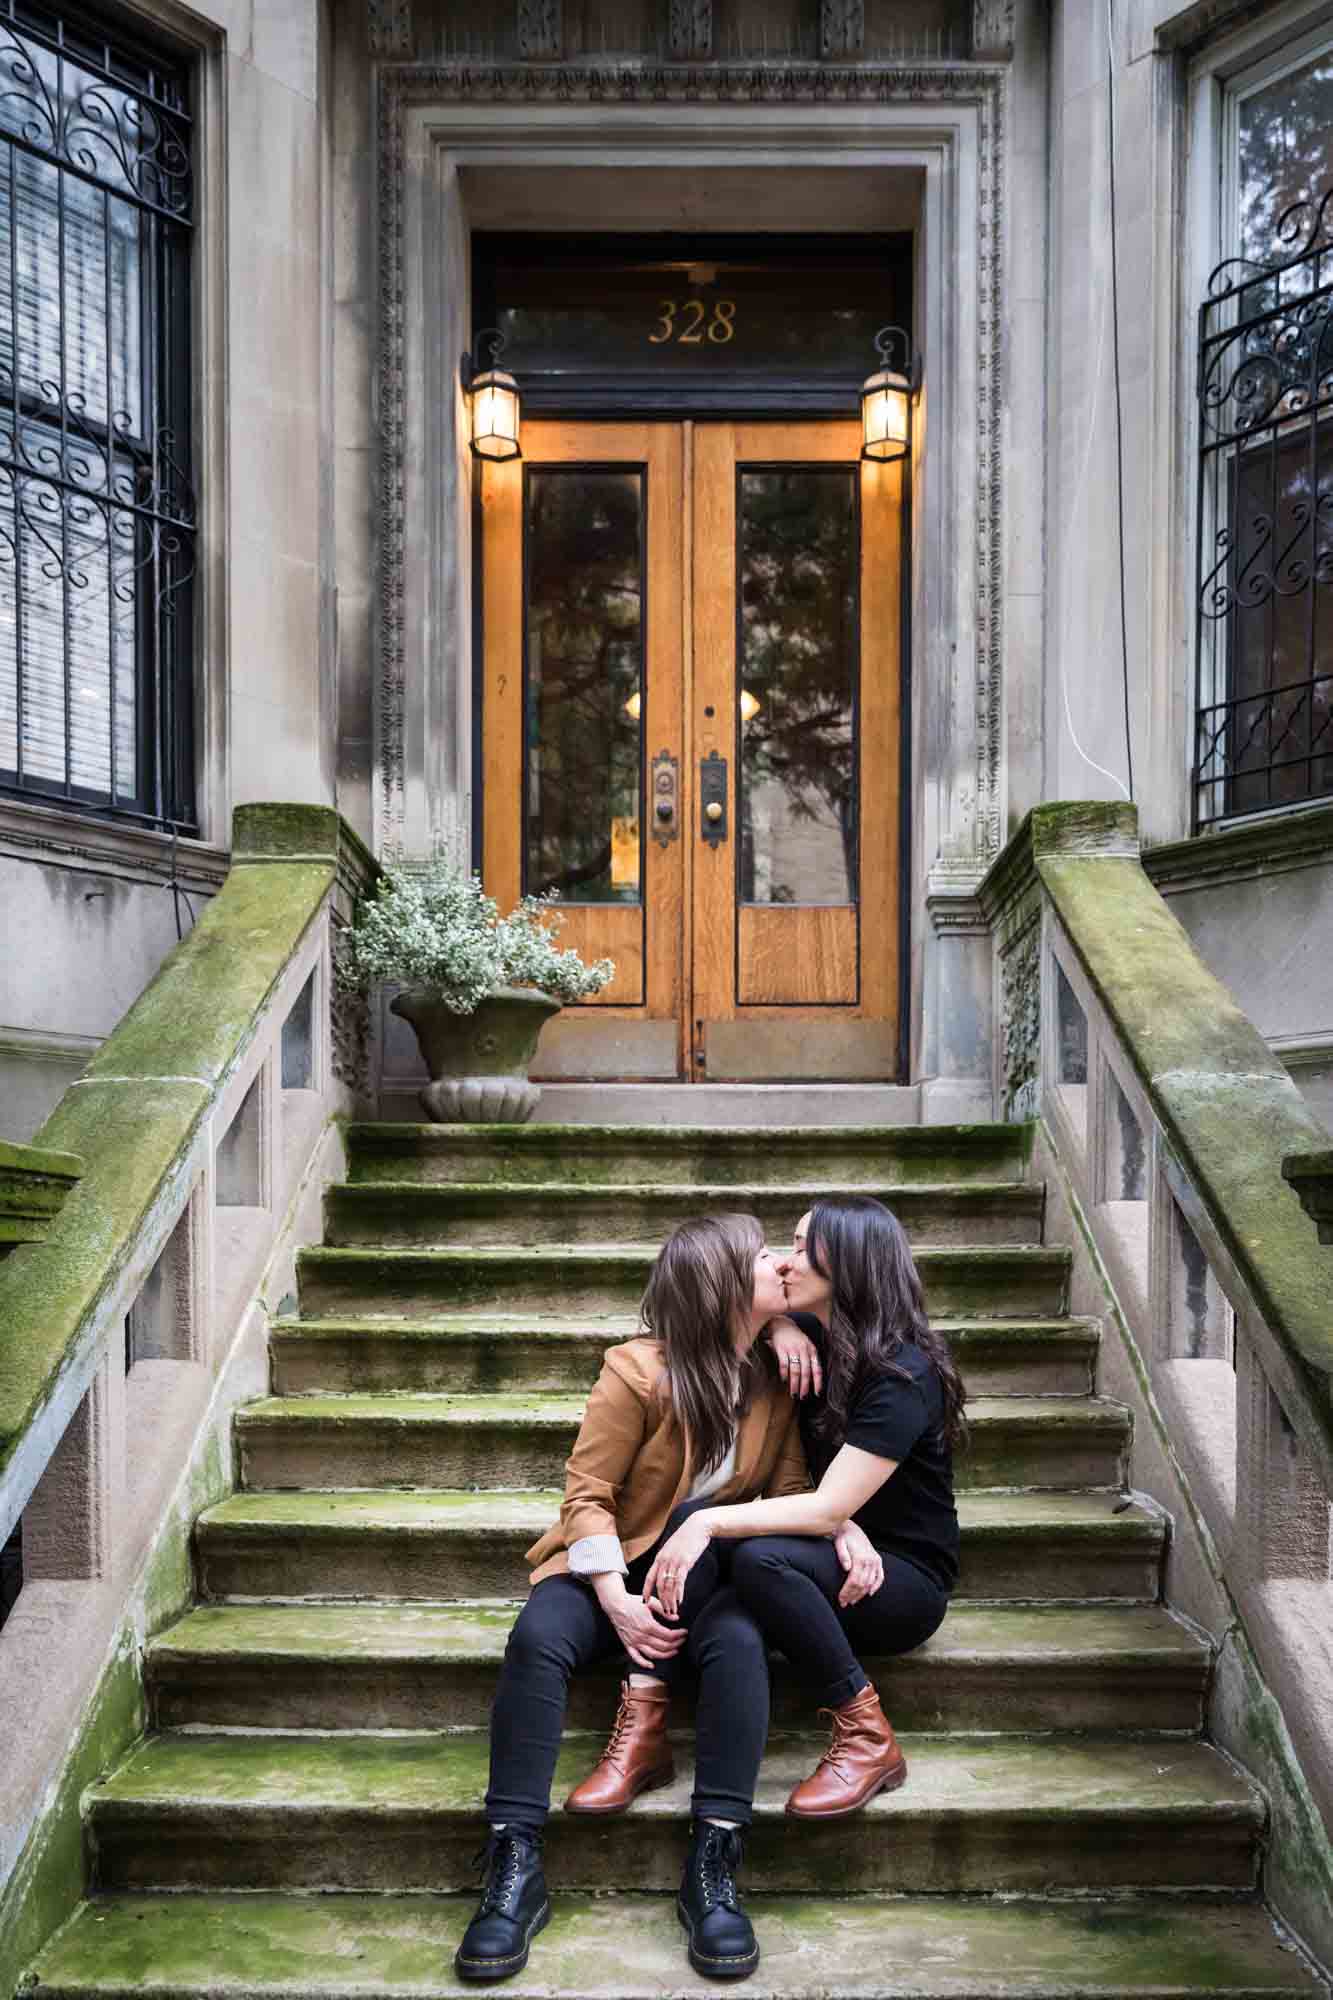 Two women kissing on a stone staircase of a brownstone in NYC for an article on how to produce a movie-themed surprise proposal